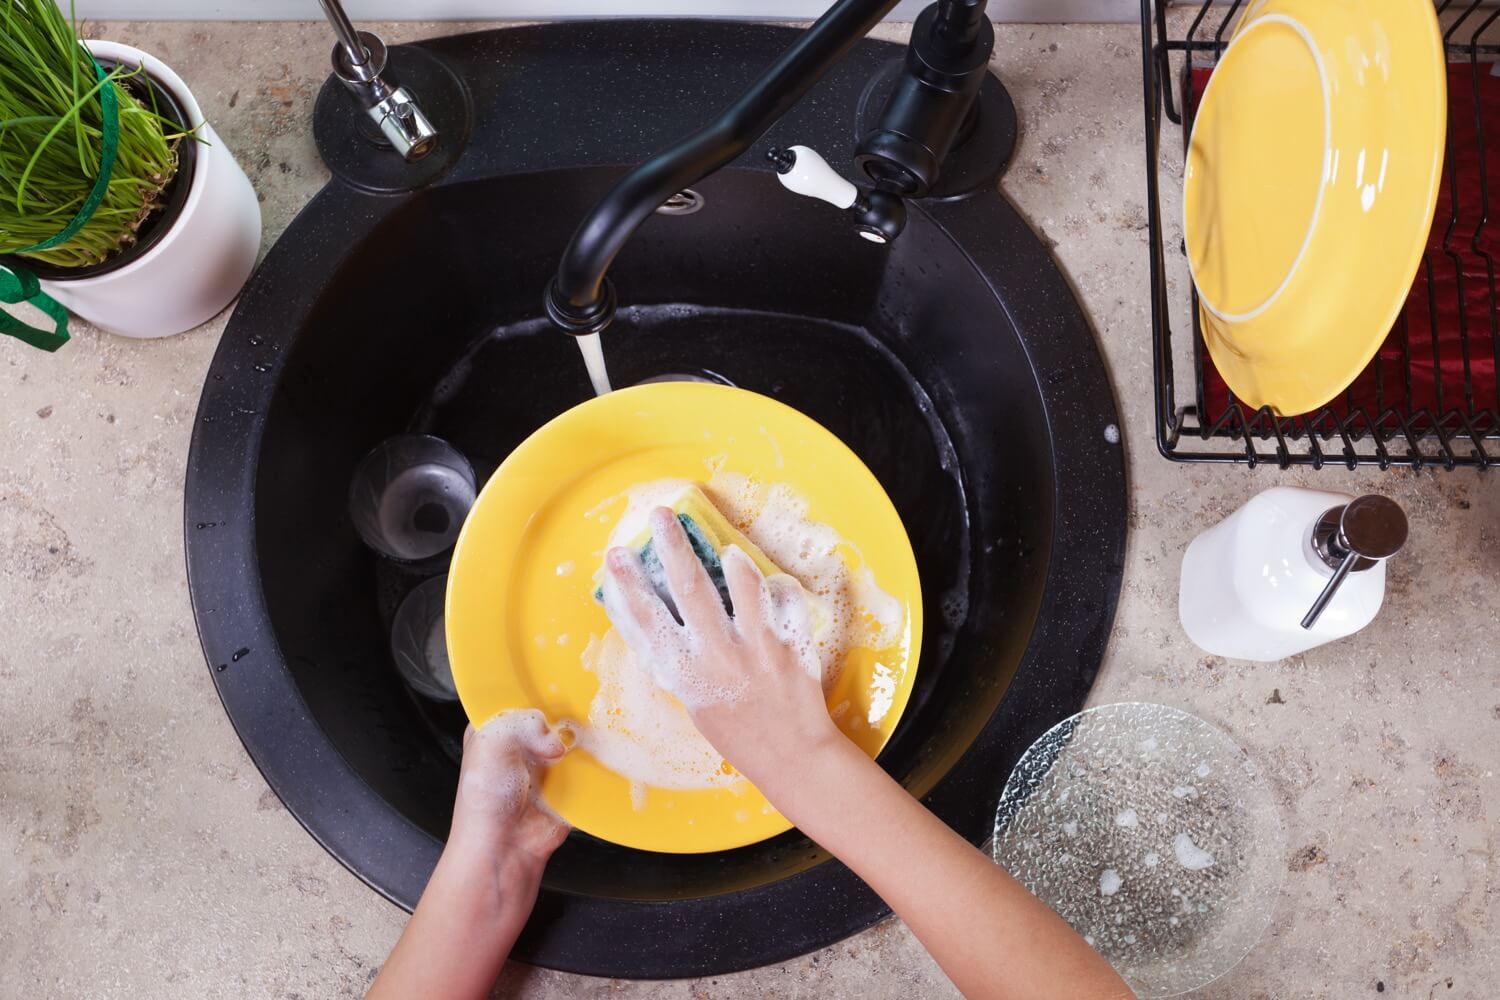 Overhead view of a person washing a plate in the sink.